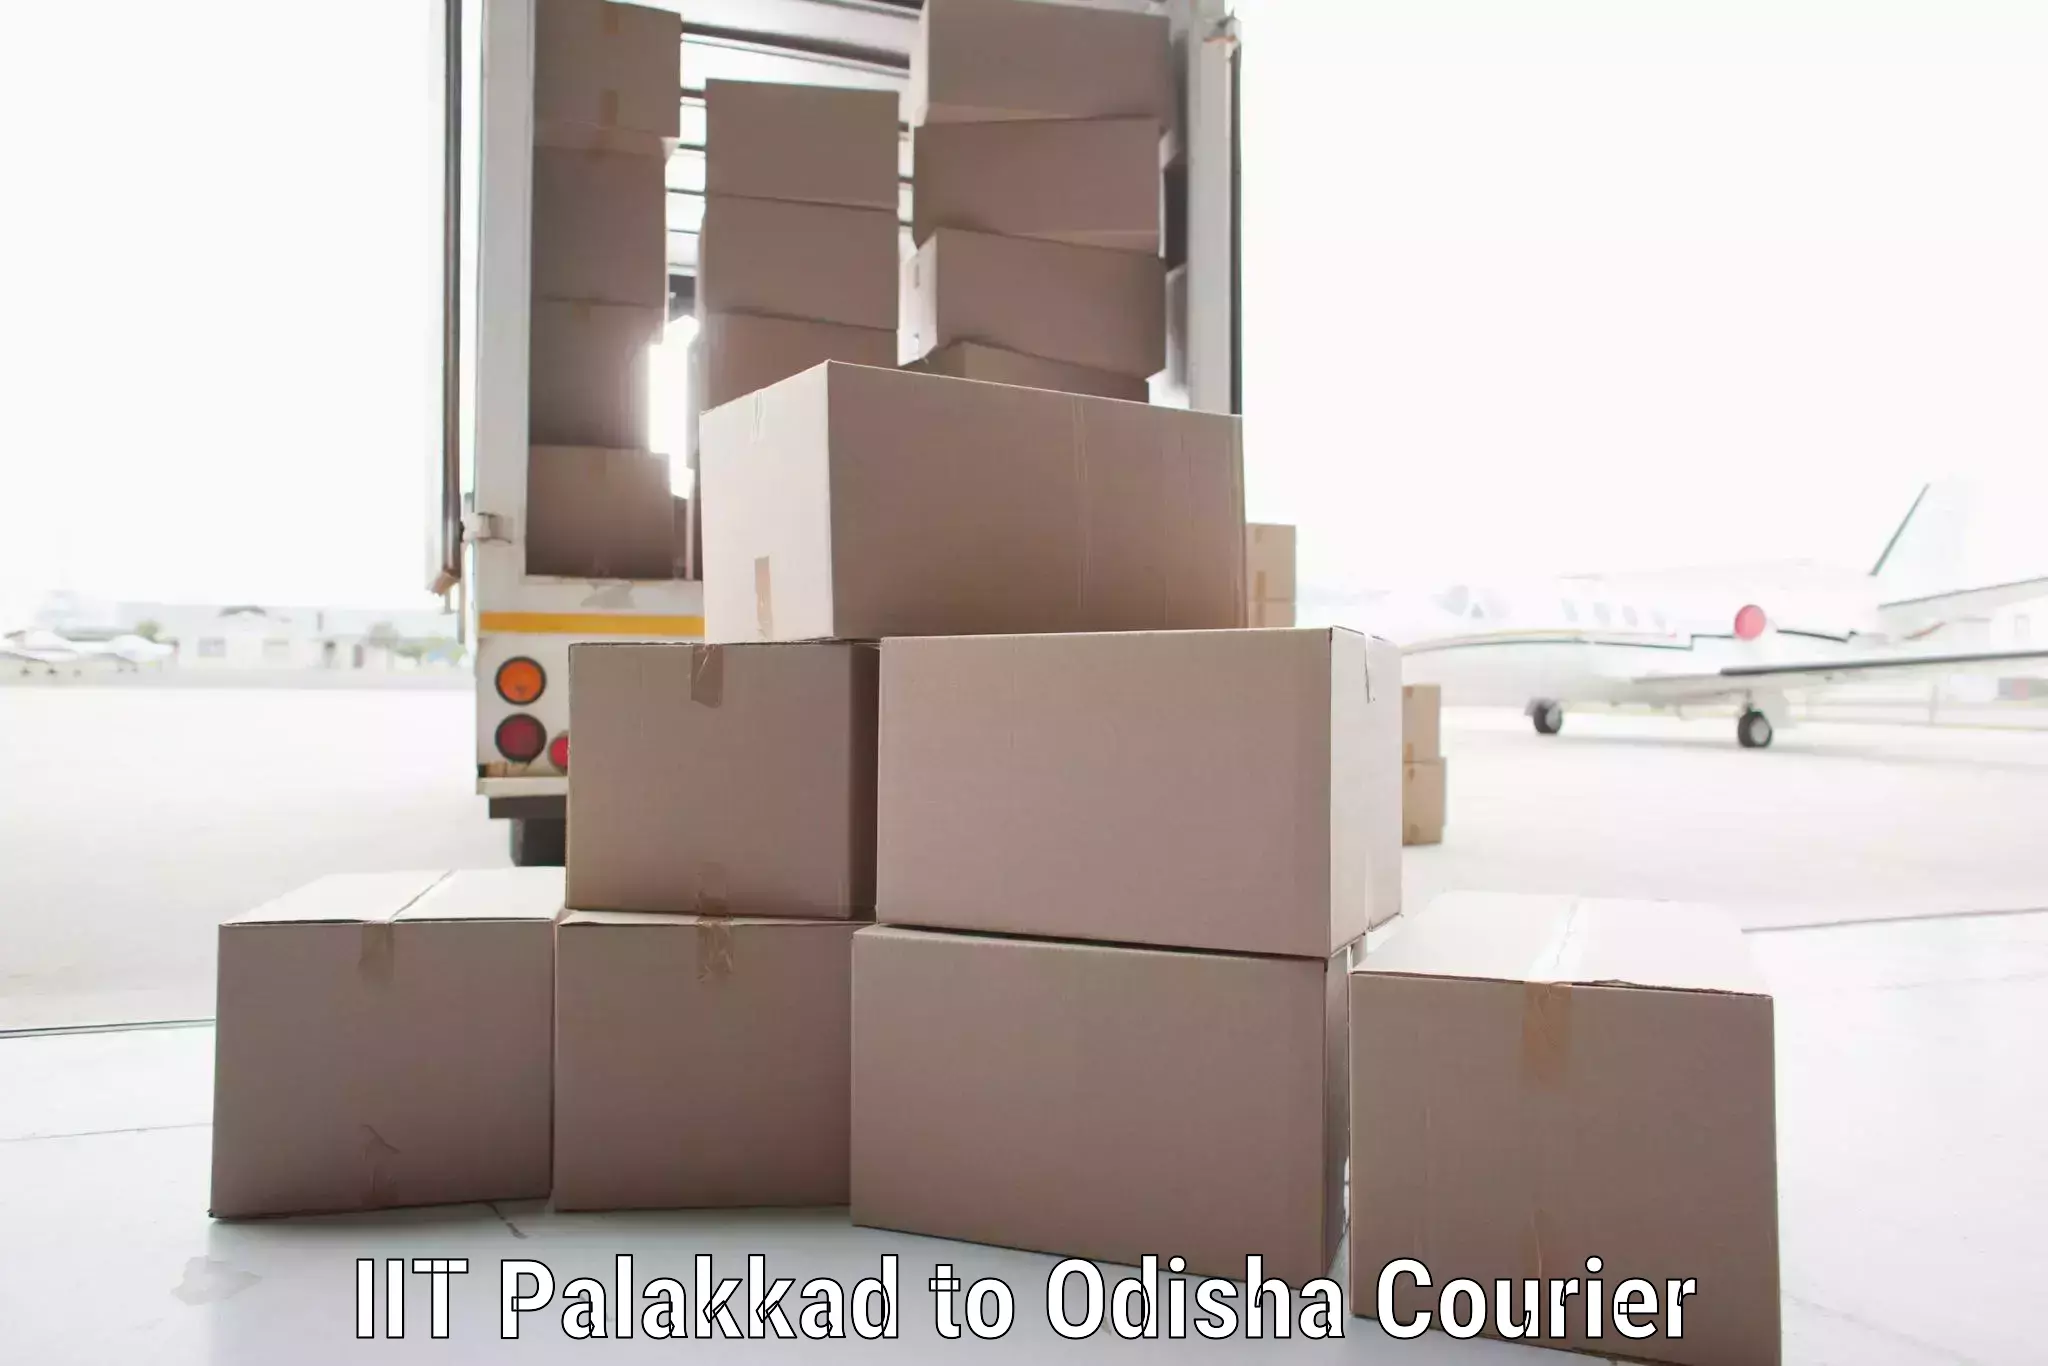 On-call courier service IIT Palakkad to Gajapati